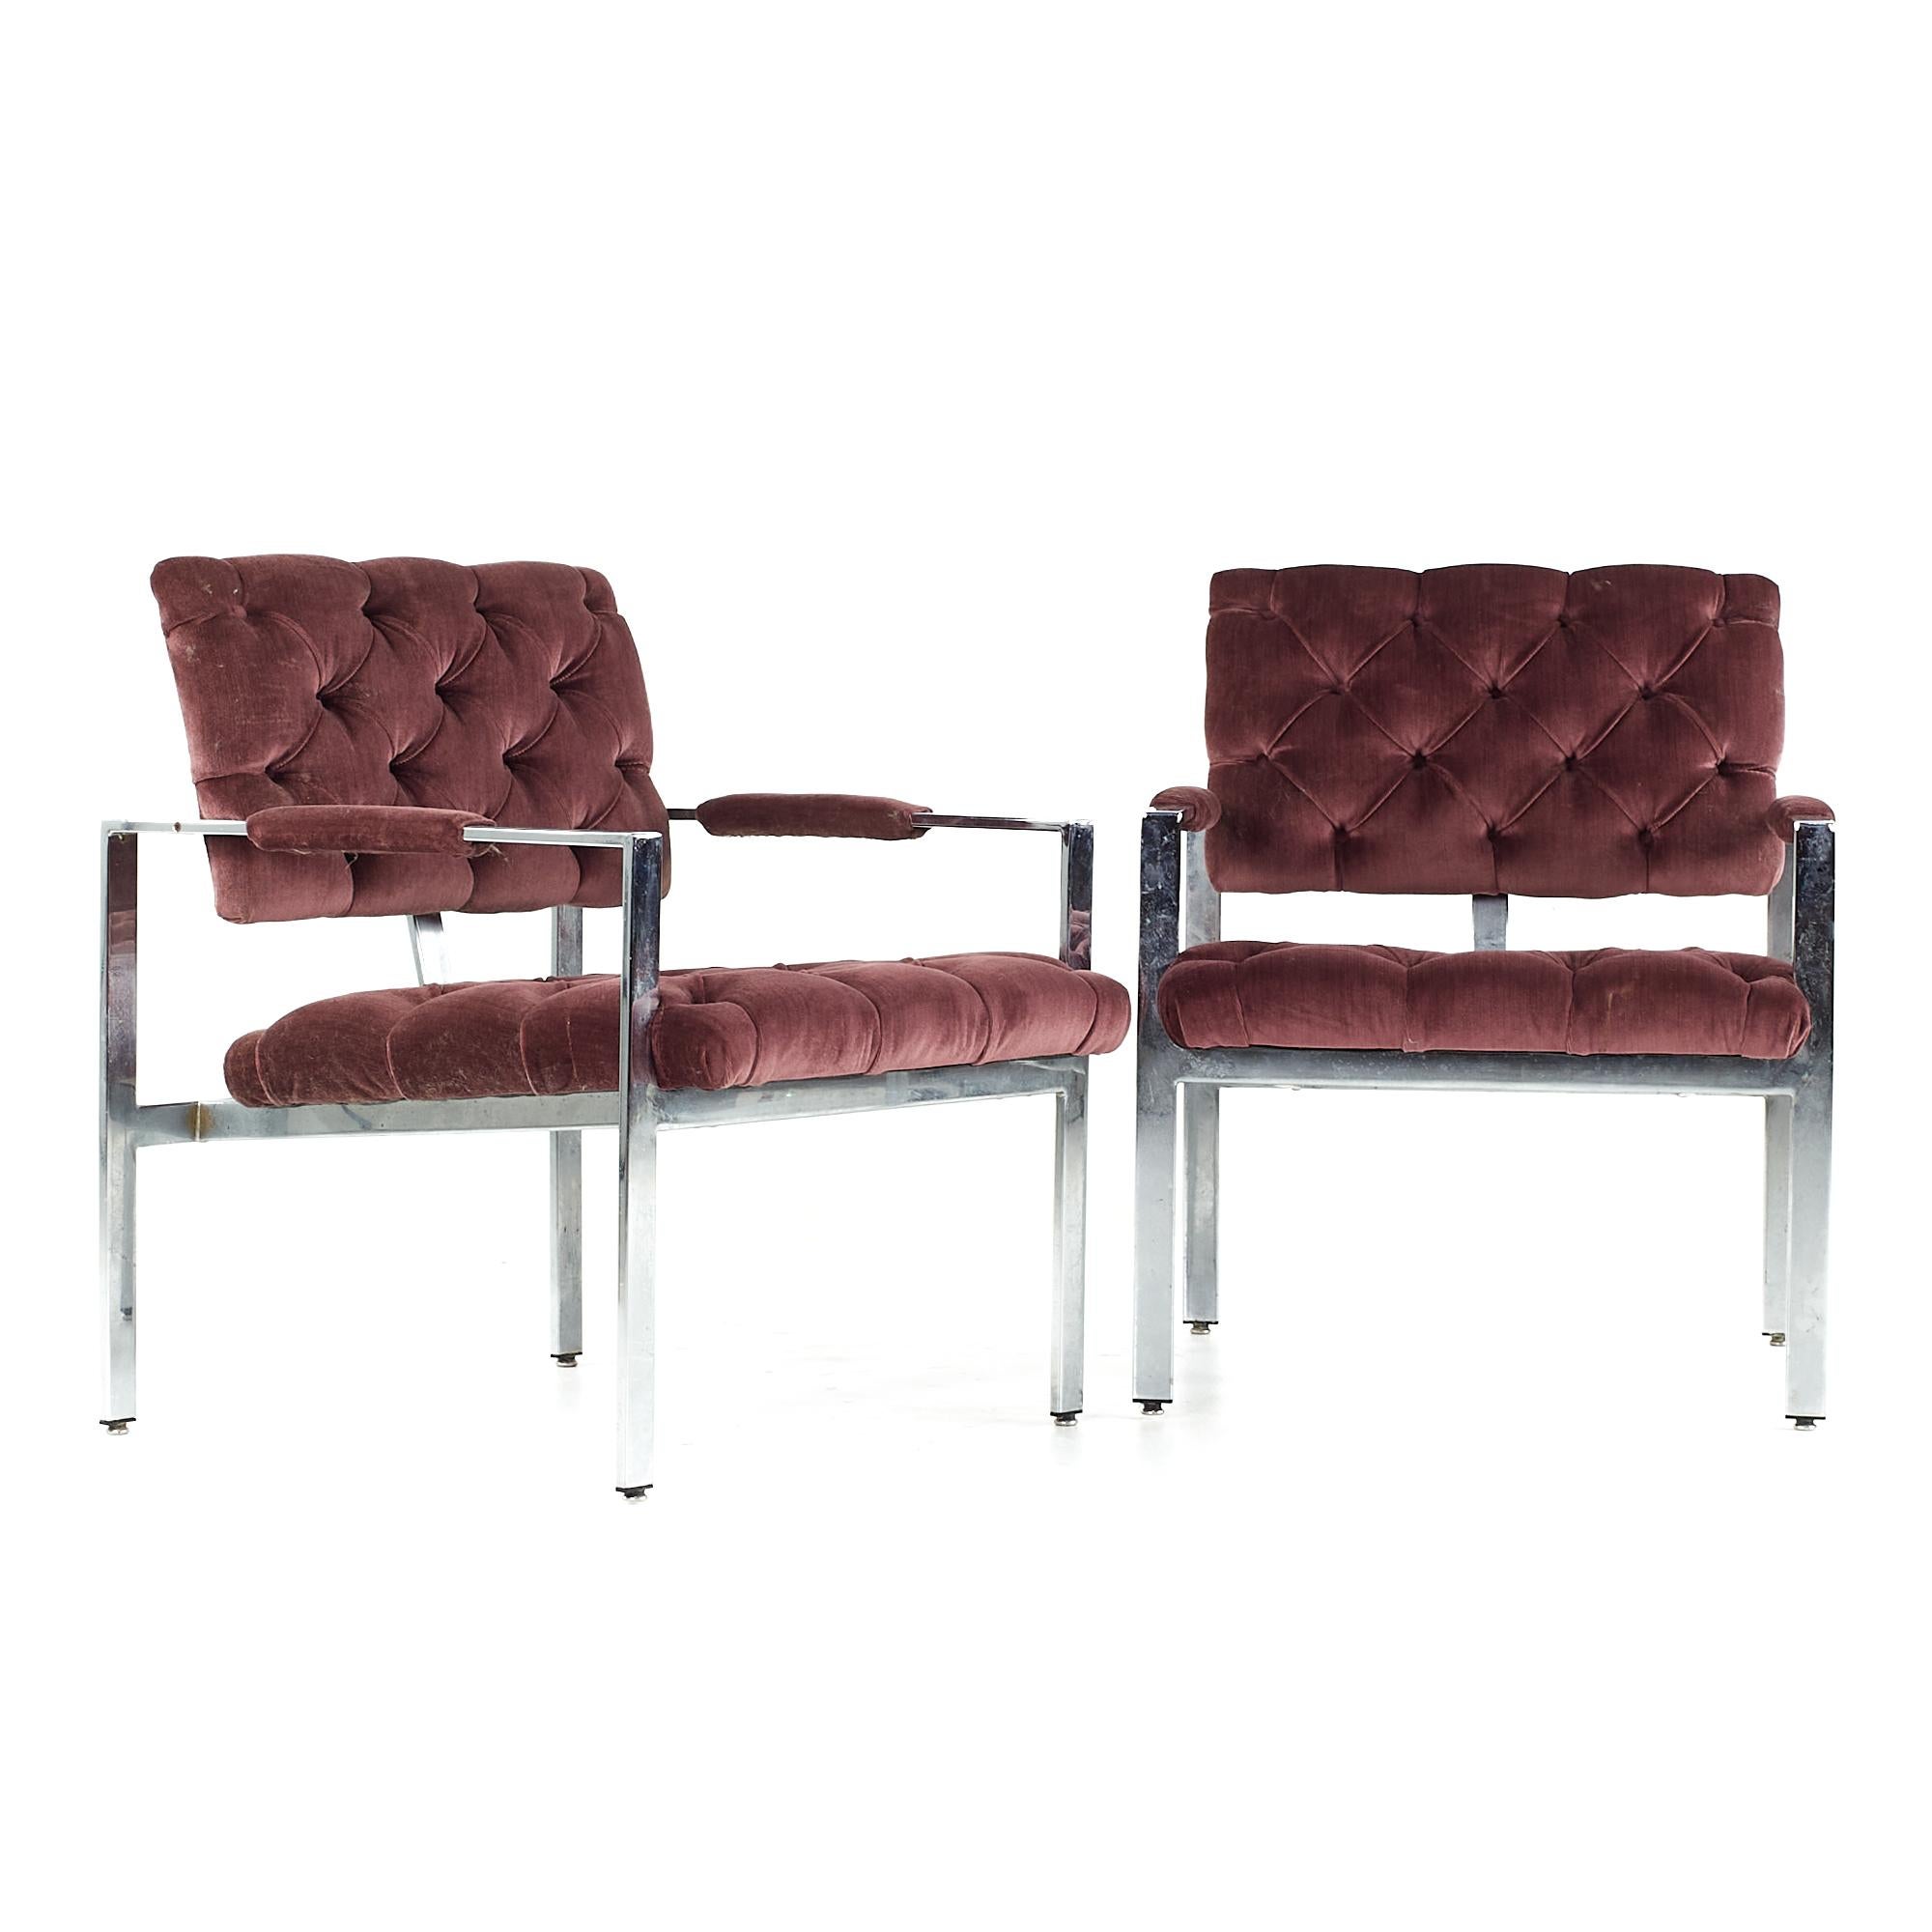 Late 20th Century Milo Baughman for Thayer Coggin Midcentury Chrome Tufted Arm Chairs, Set of 6 For Sale